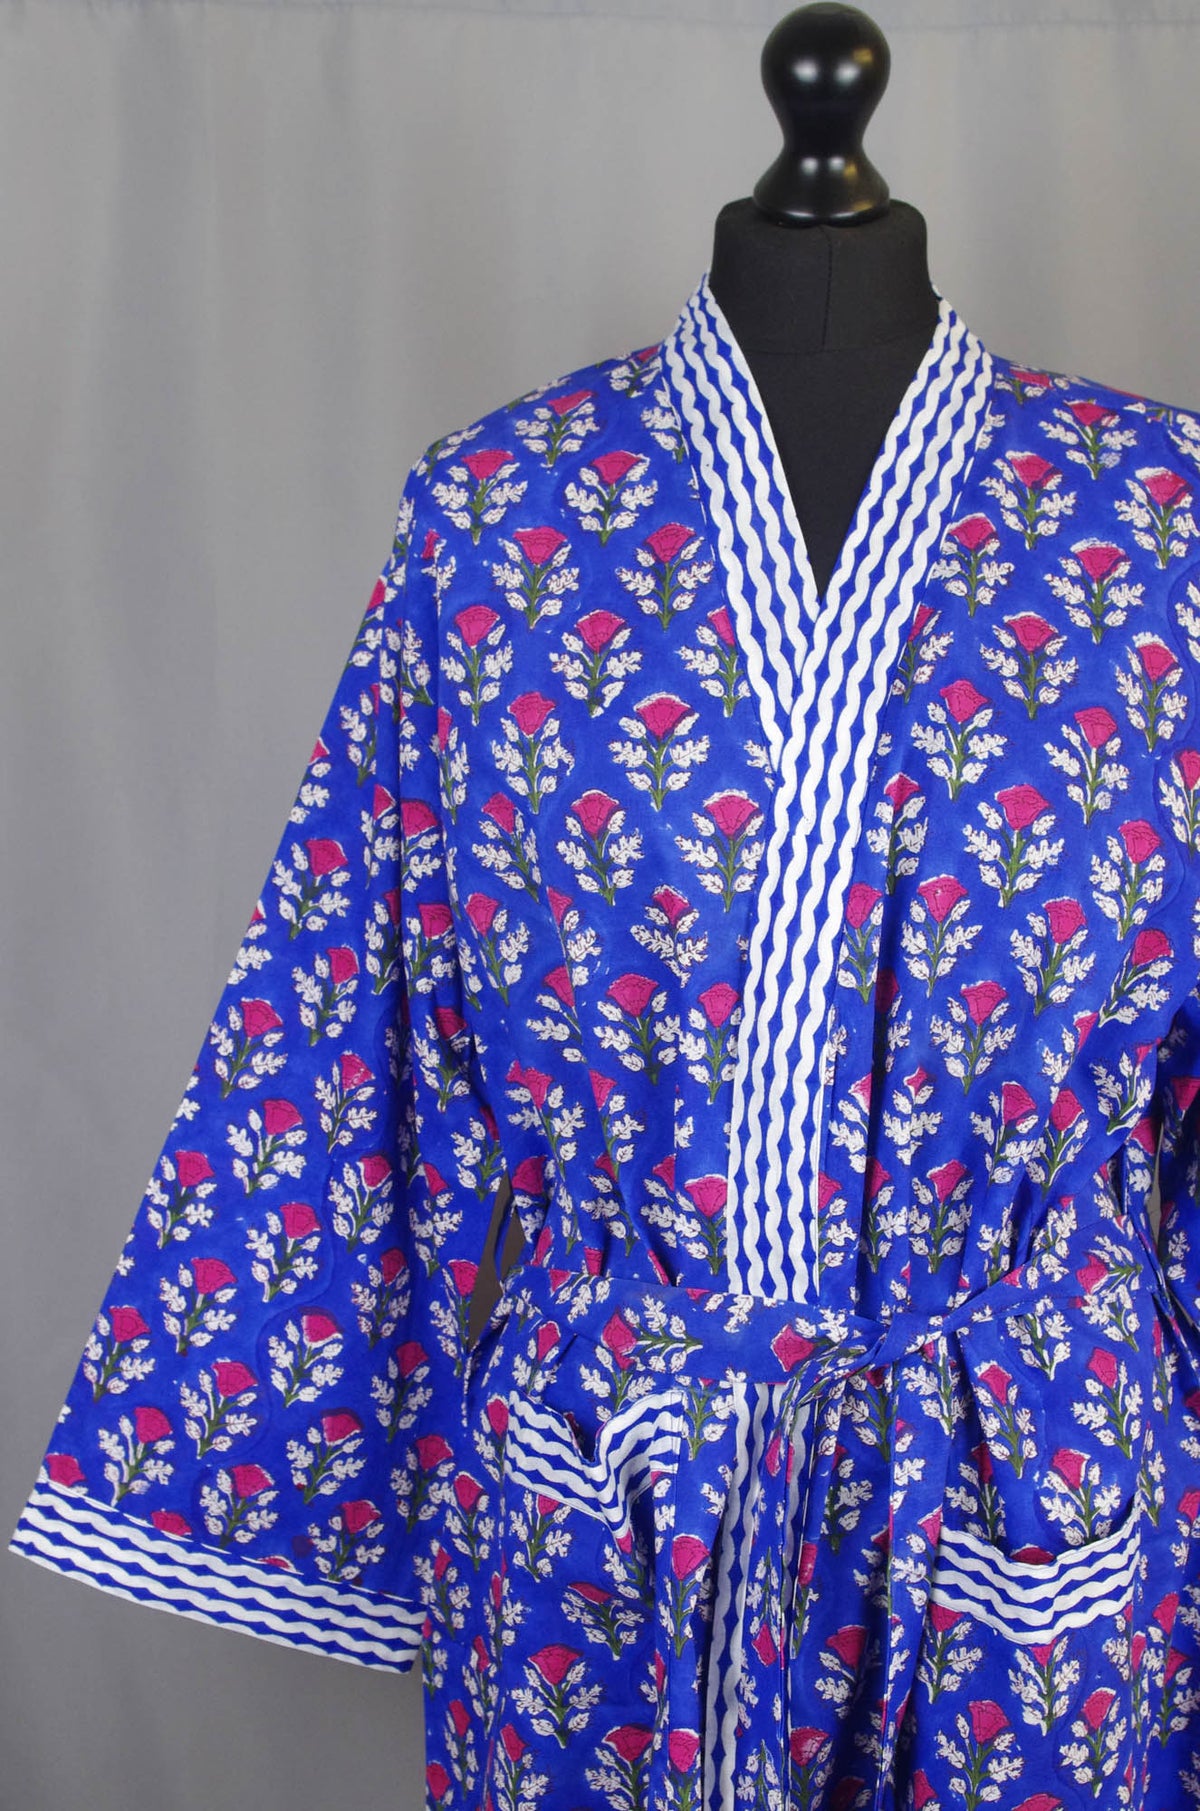 Dark Blue With Red Floral Motifs Cotton Kimono Dressing Gown